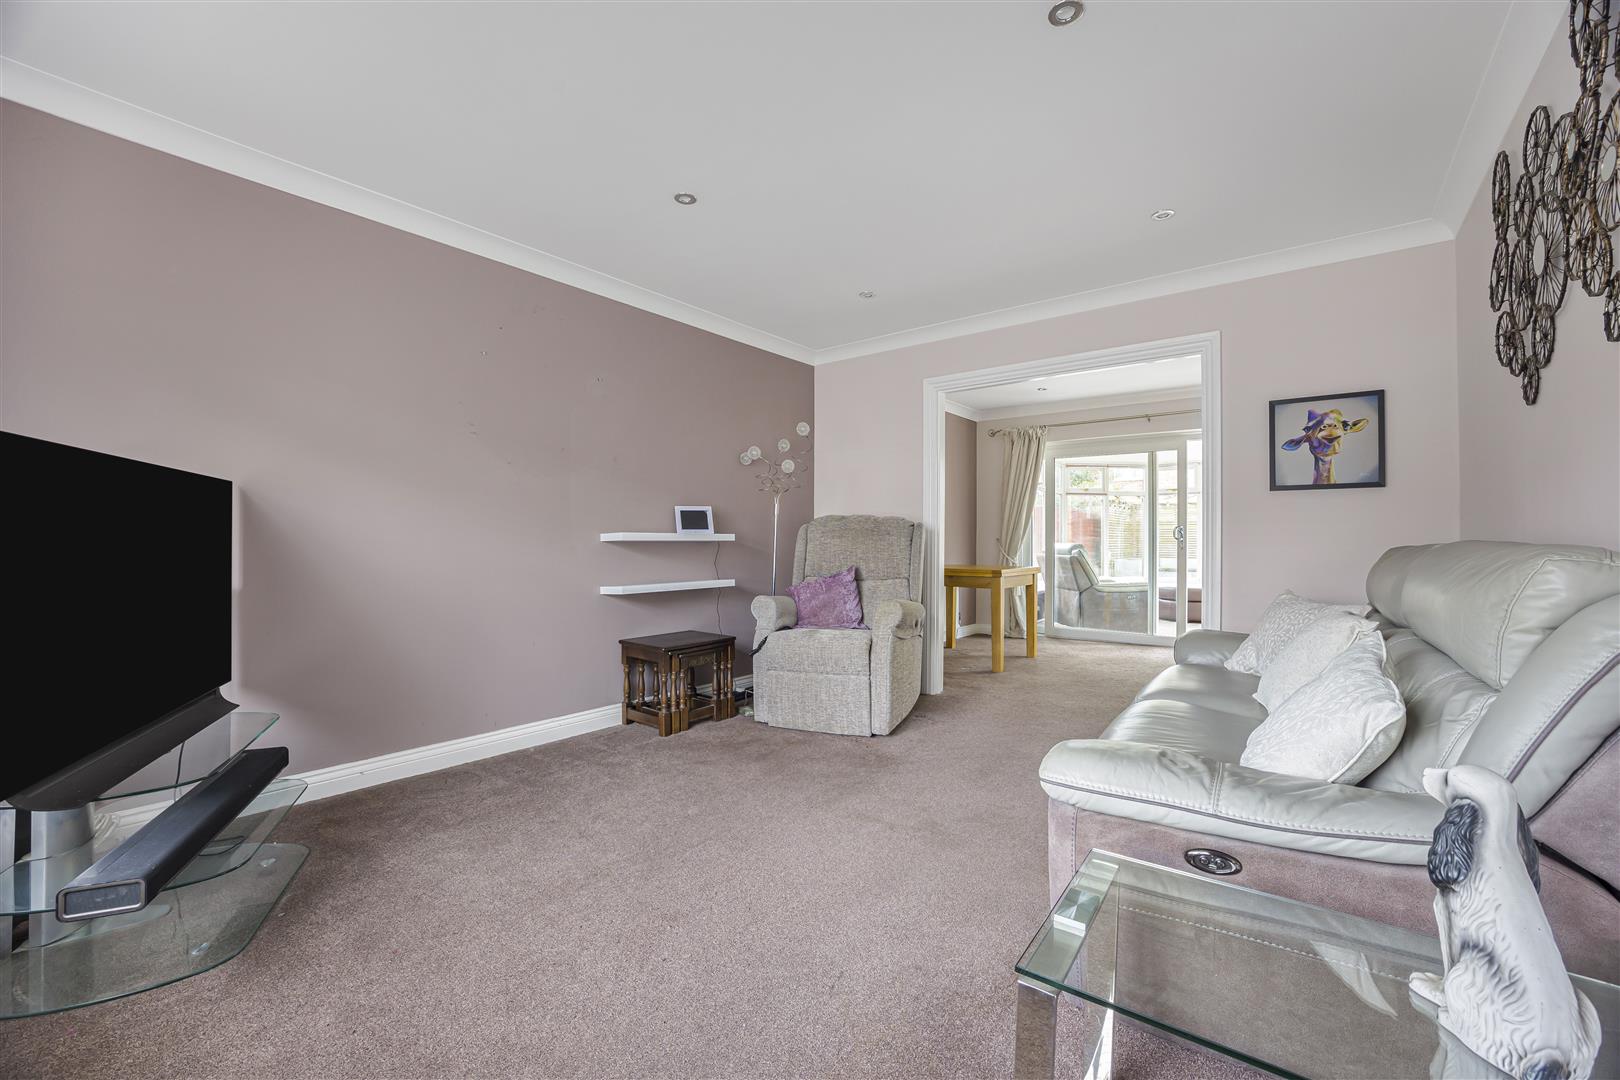 Brill Close Caversham house for sale in Reading